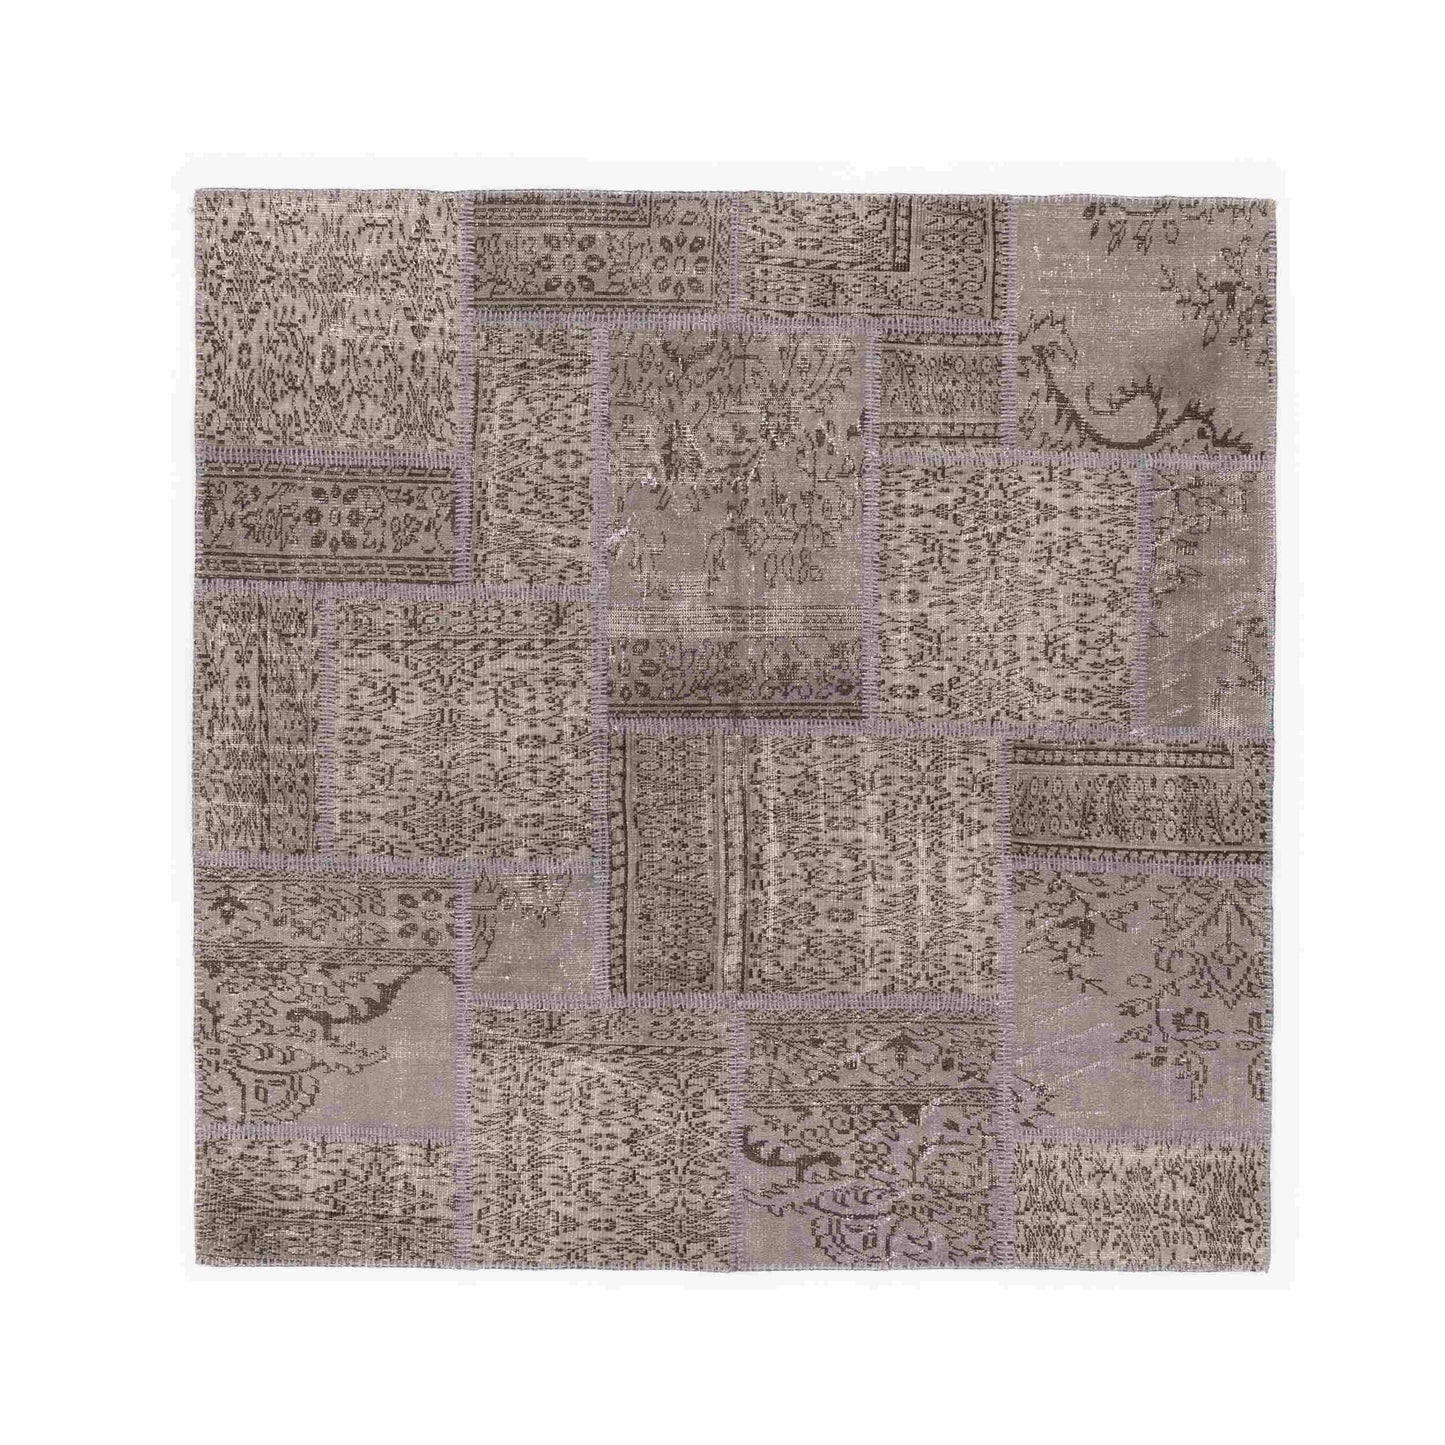 Oriental Rug Patchwork Hand Knotted Wool On Wool 200 x 200 Cm - 6' 7'' x 6' 7'' ER12